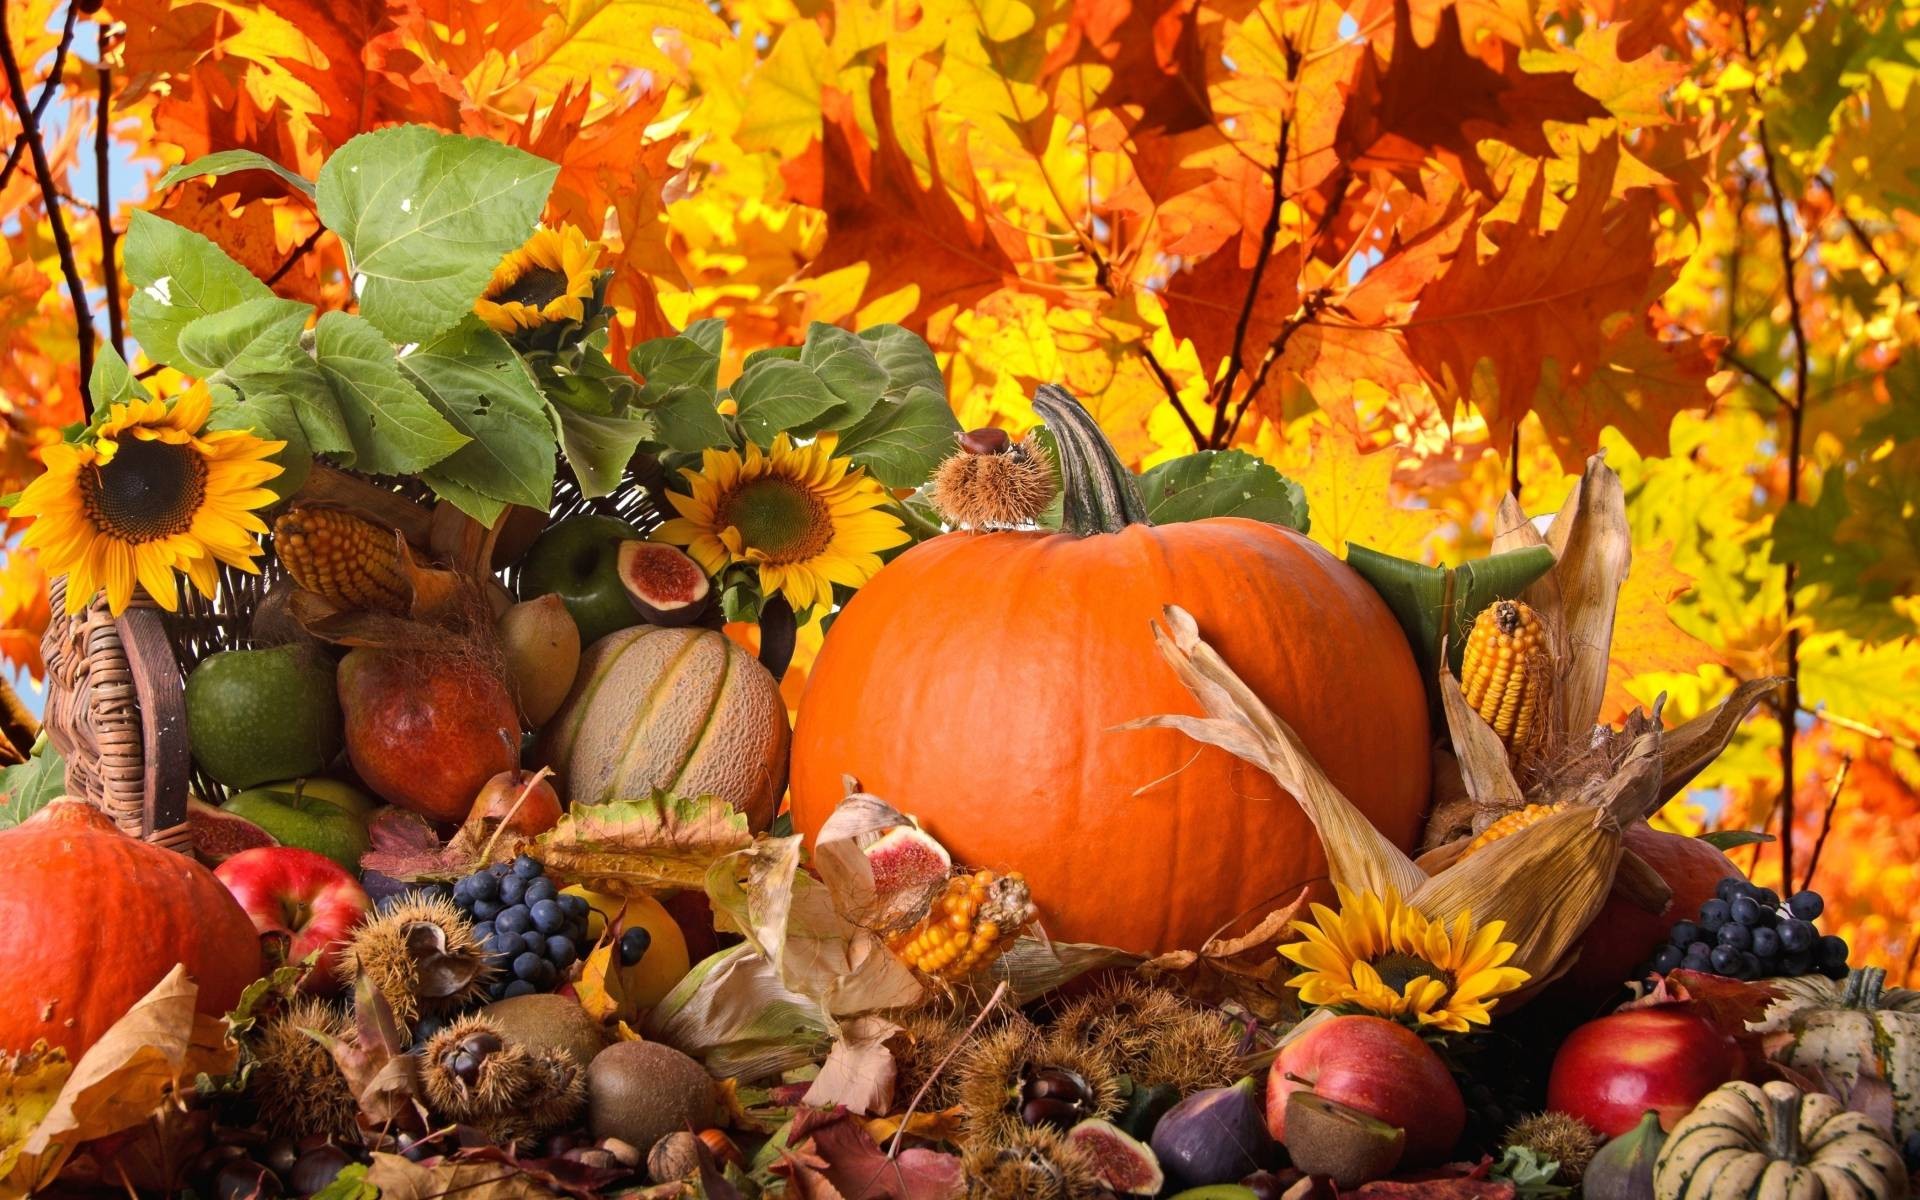 1920x1200 38 Thanksgiving Wallpapers | Thanksgiving Backgrounds